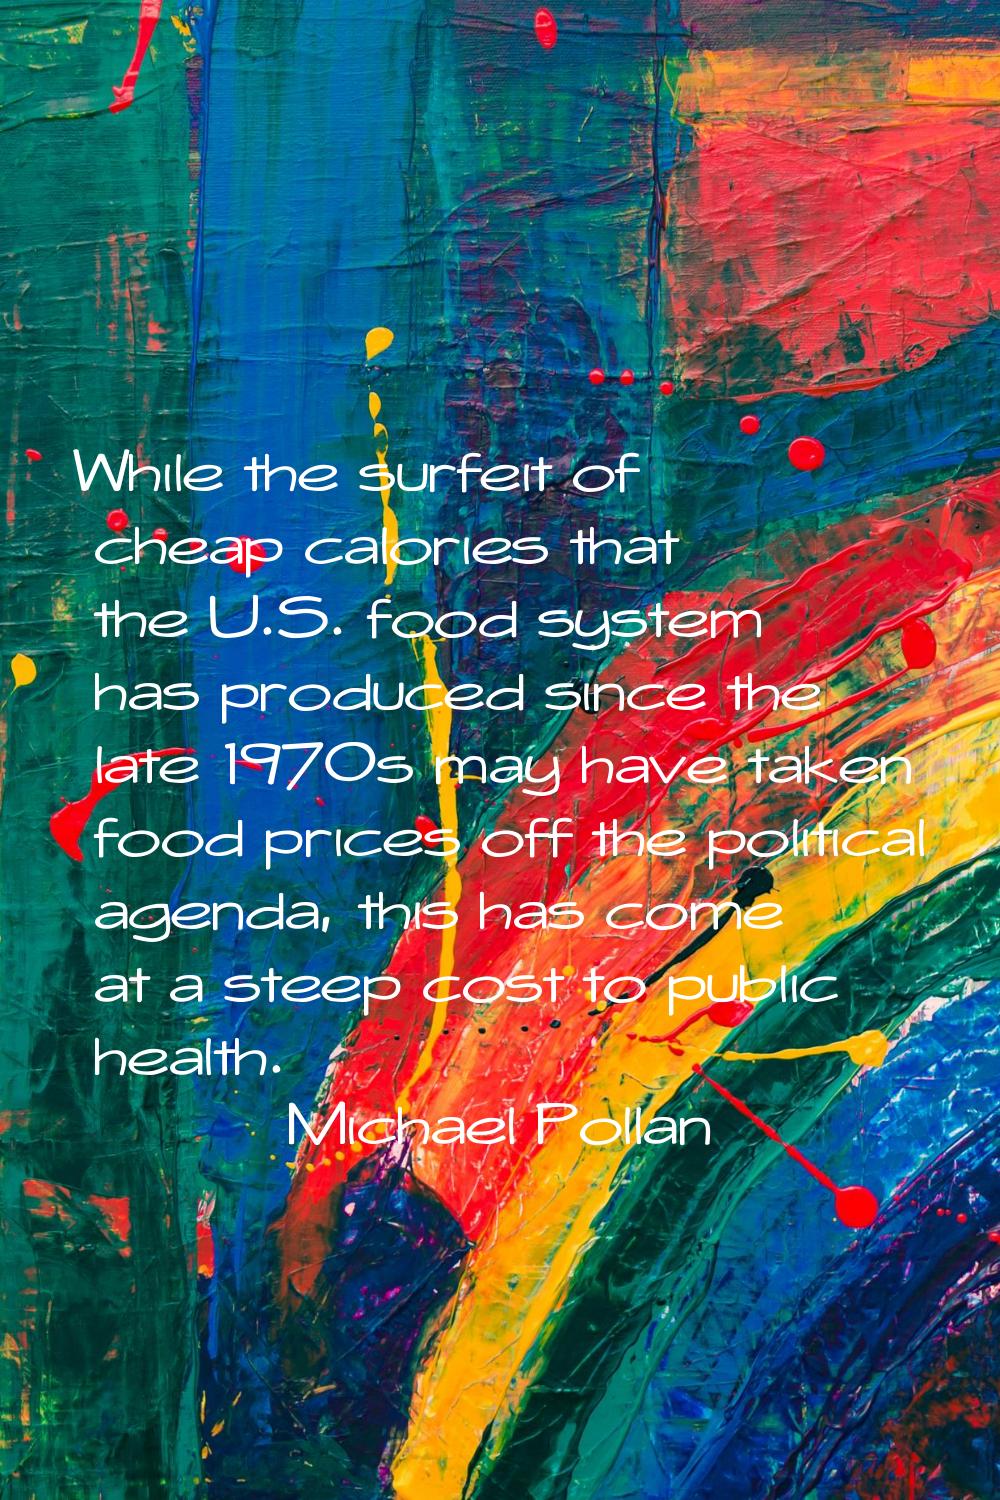 While the surfeit of cheap calories that the U.S. food system has produced since the late 1970s may